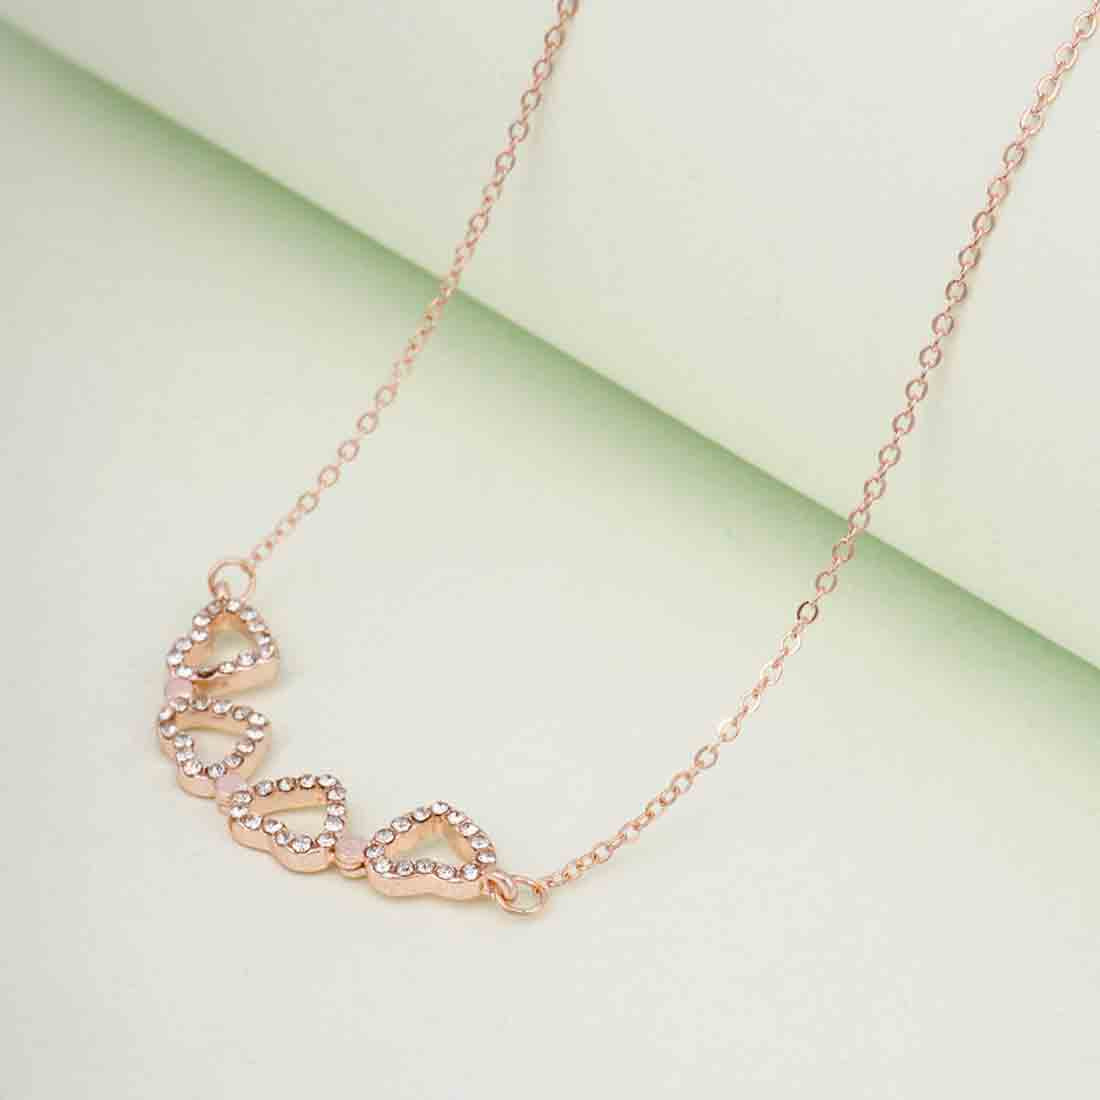 Rose Gold Florid Heart Necklace